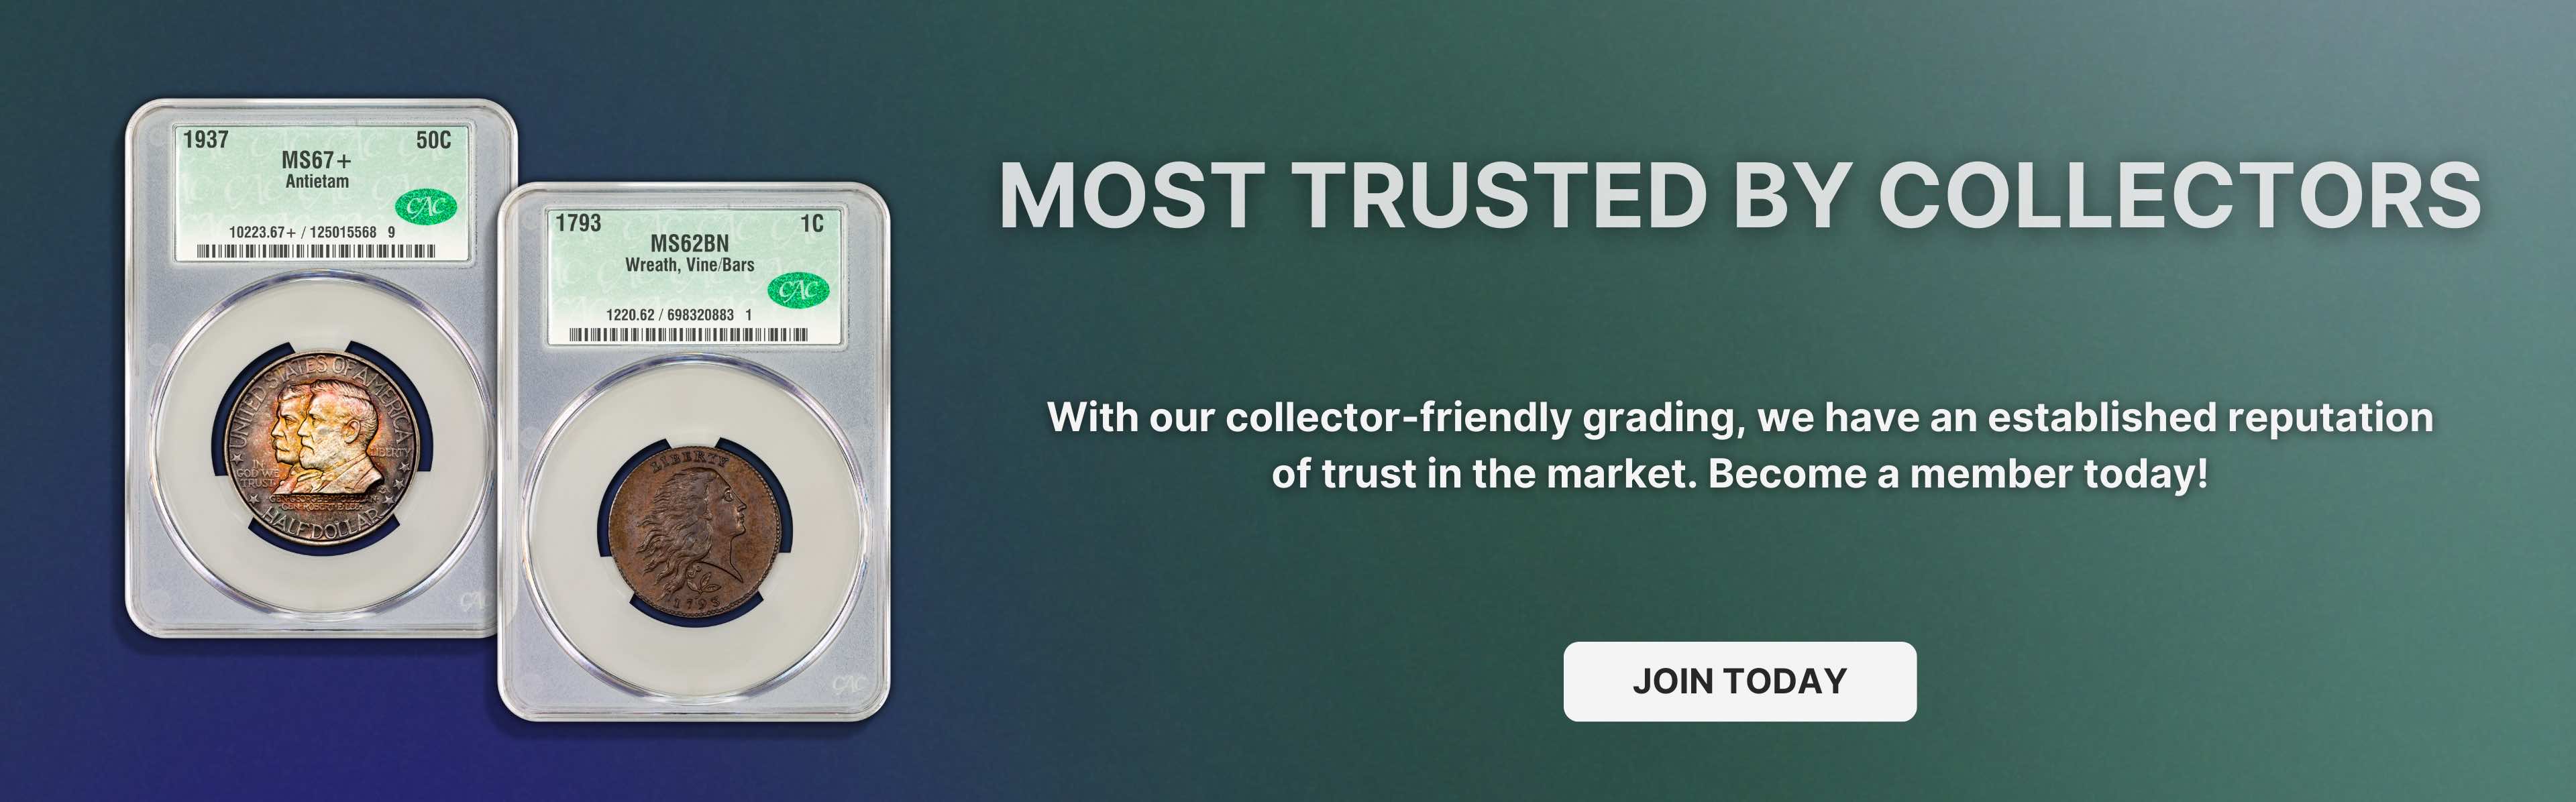 With our collector-friendly grading, we have an established reputation
of trust in the market. Become a member today!